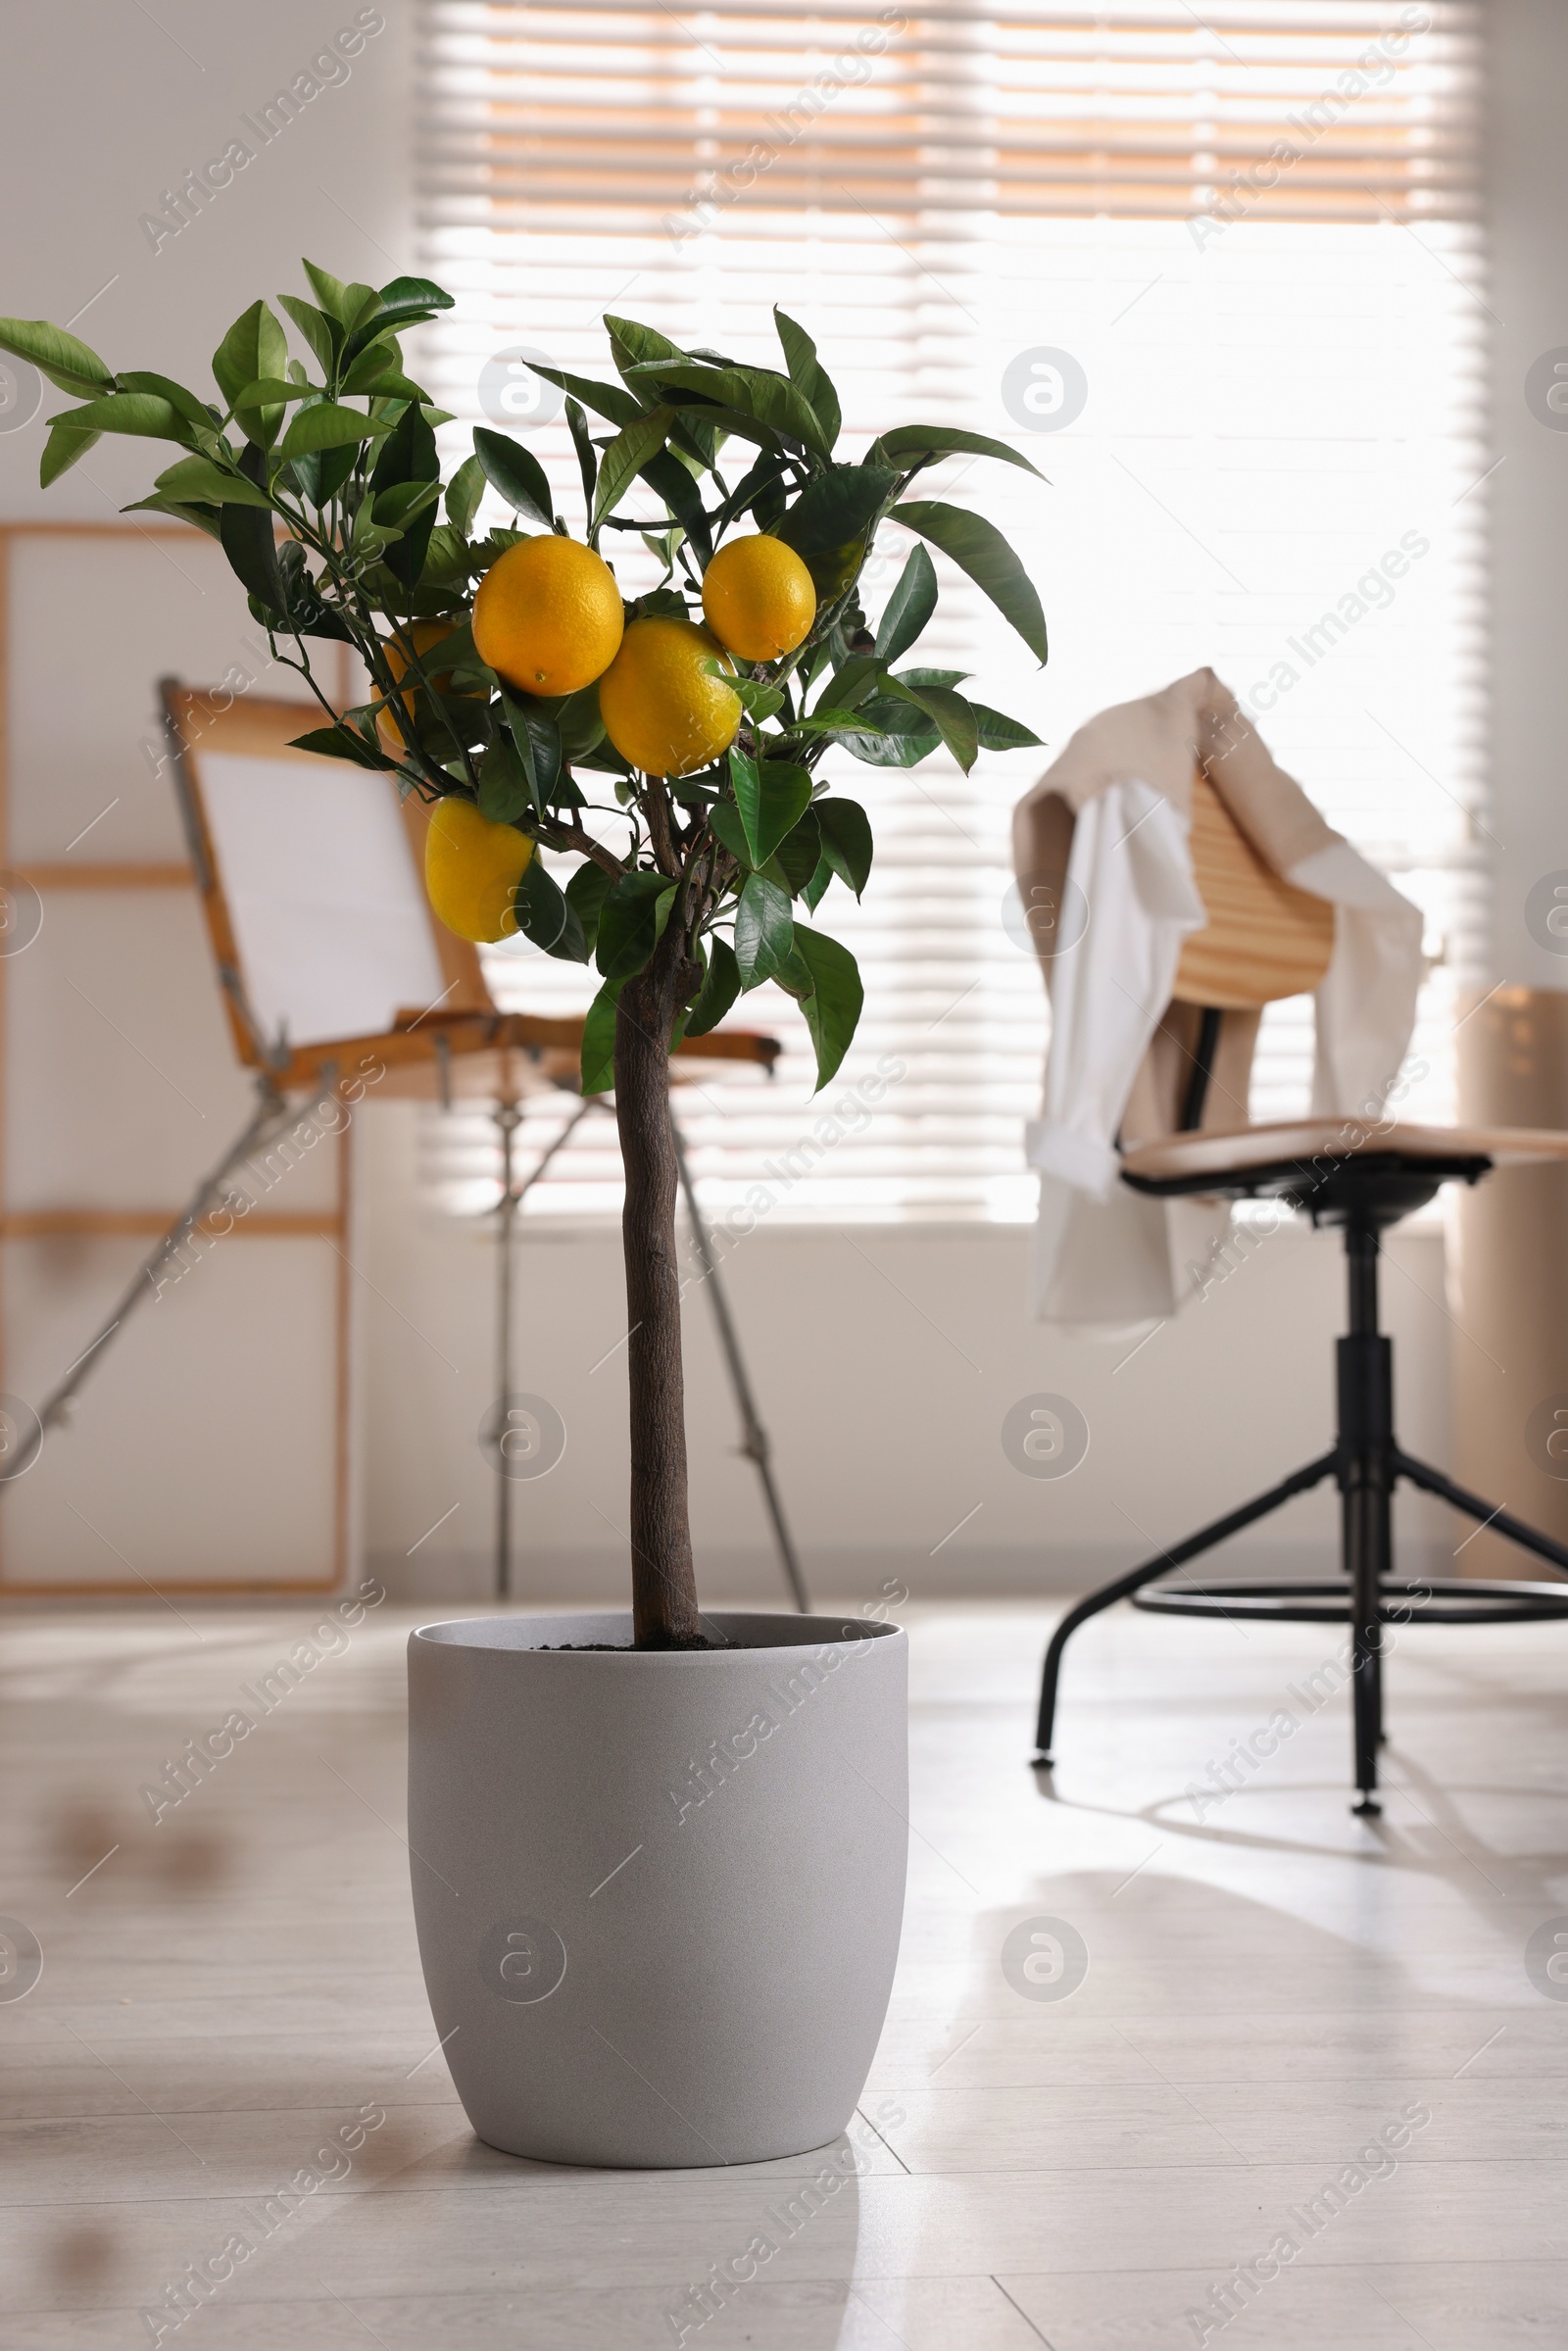 Photo of Idea for minimalist interior design. Small potted lemon tree with fruits indoors